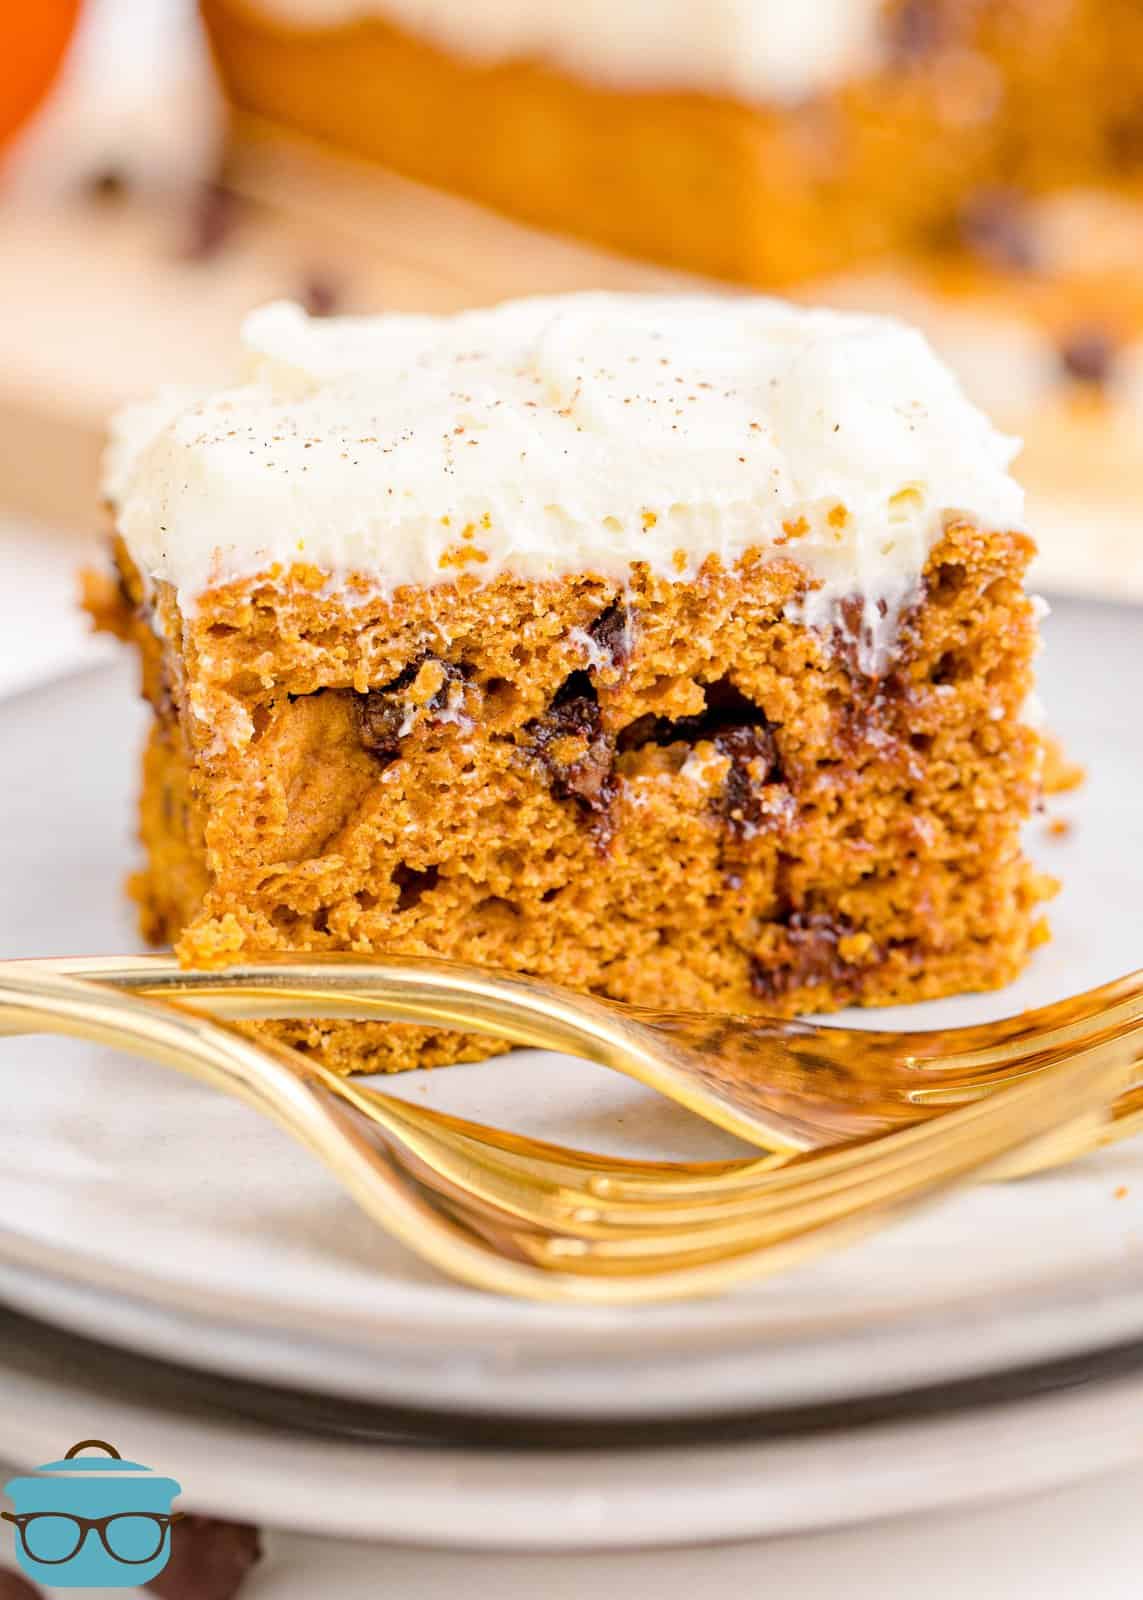 Slice of Pumpkin Chocolate Chip Cake on white plat with gold forks.